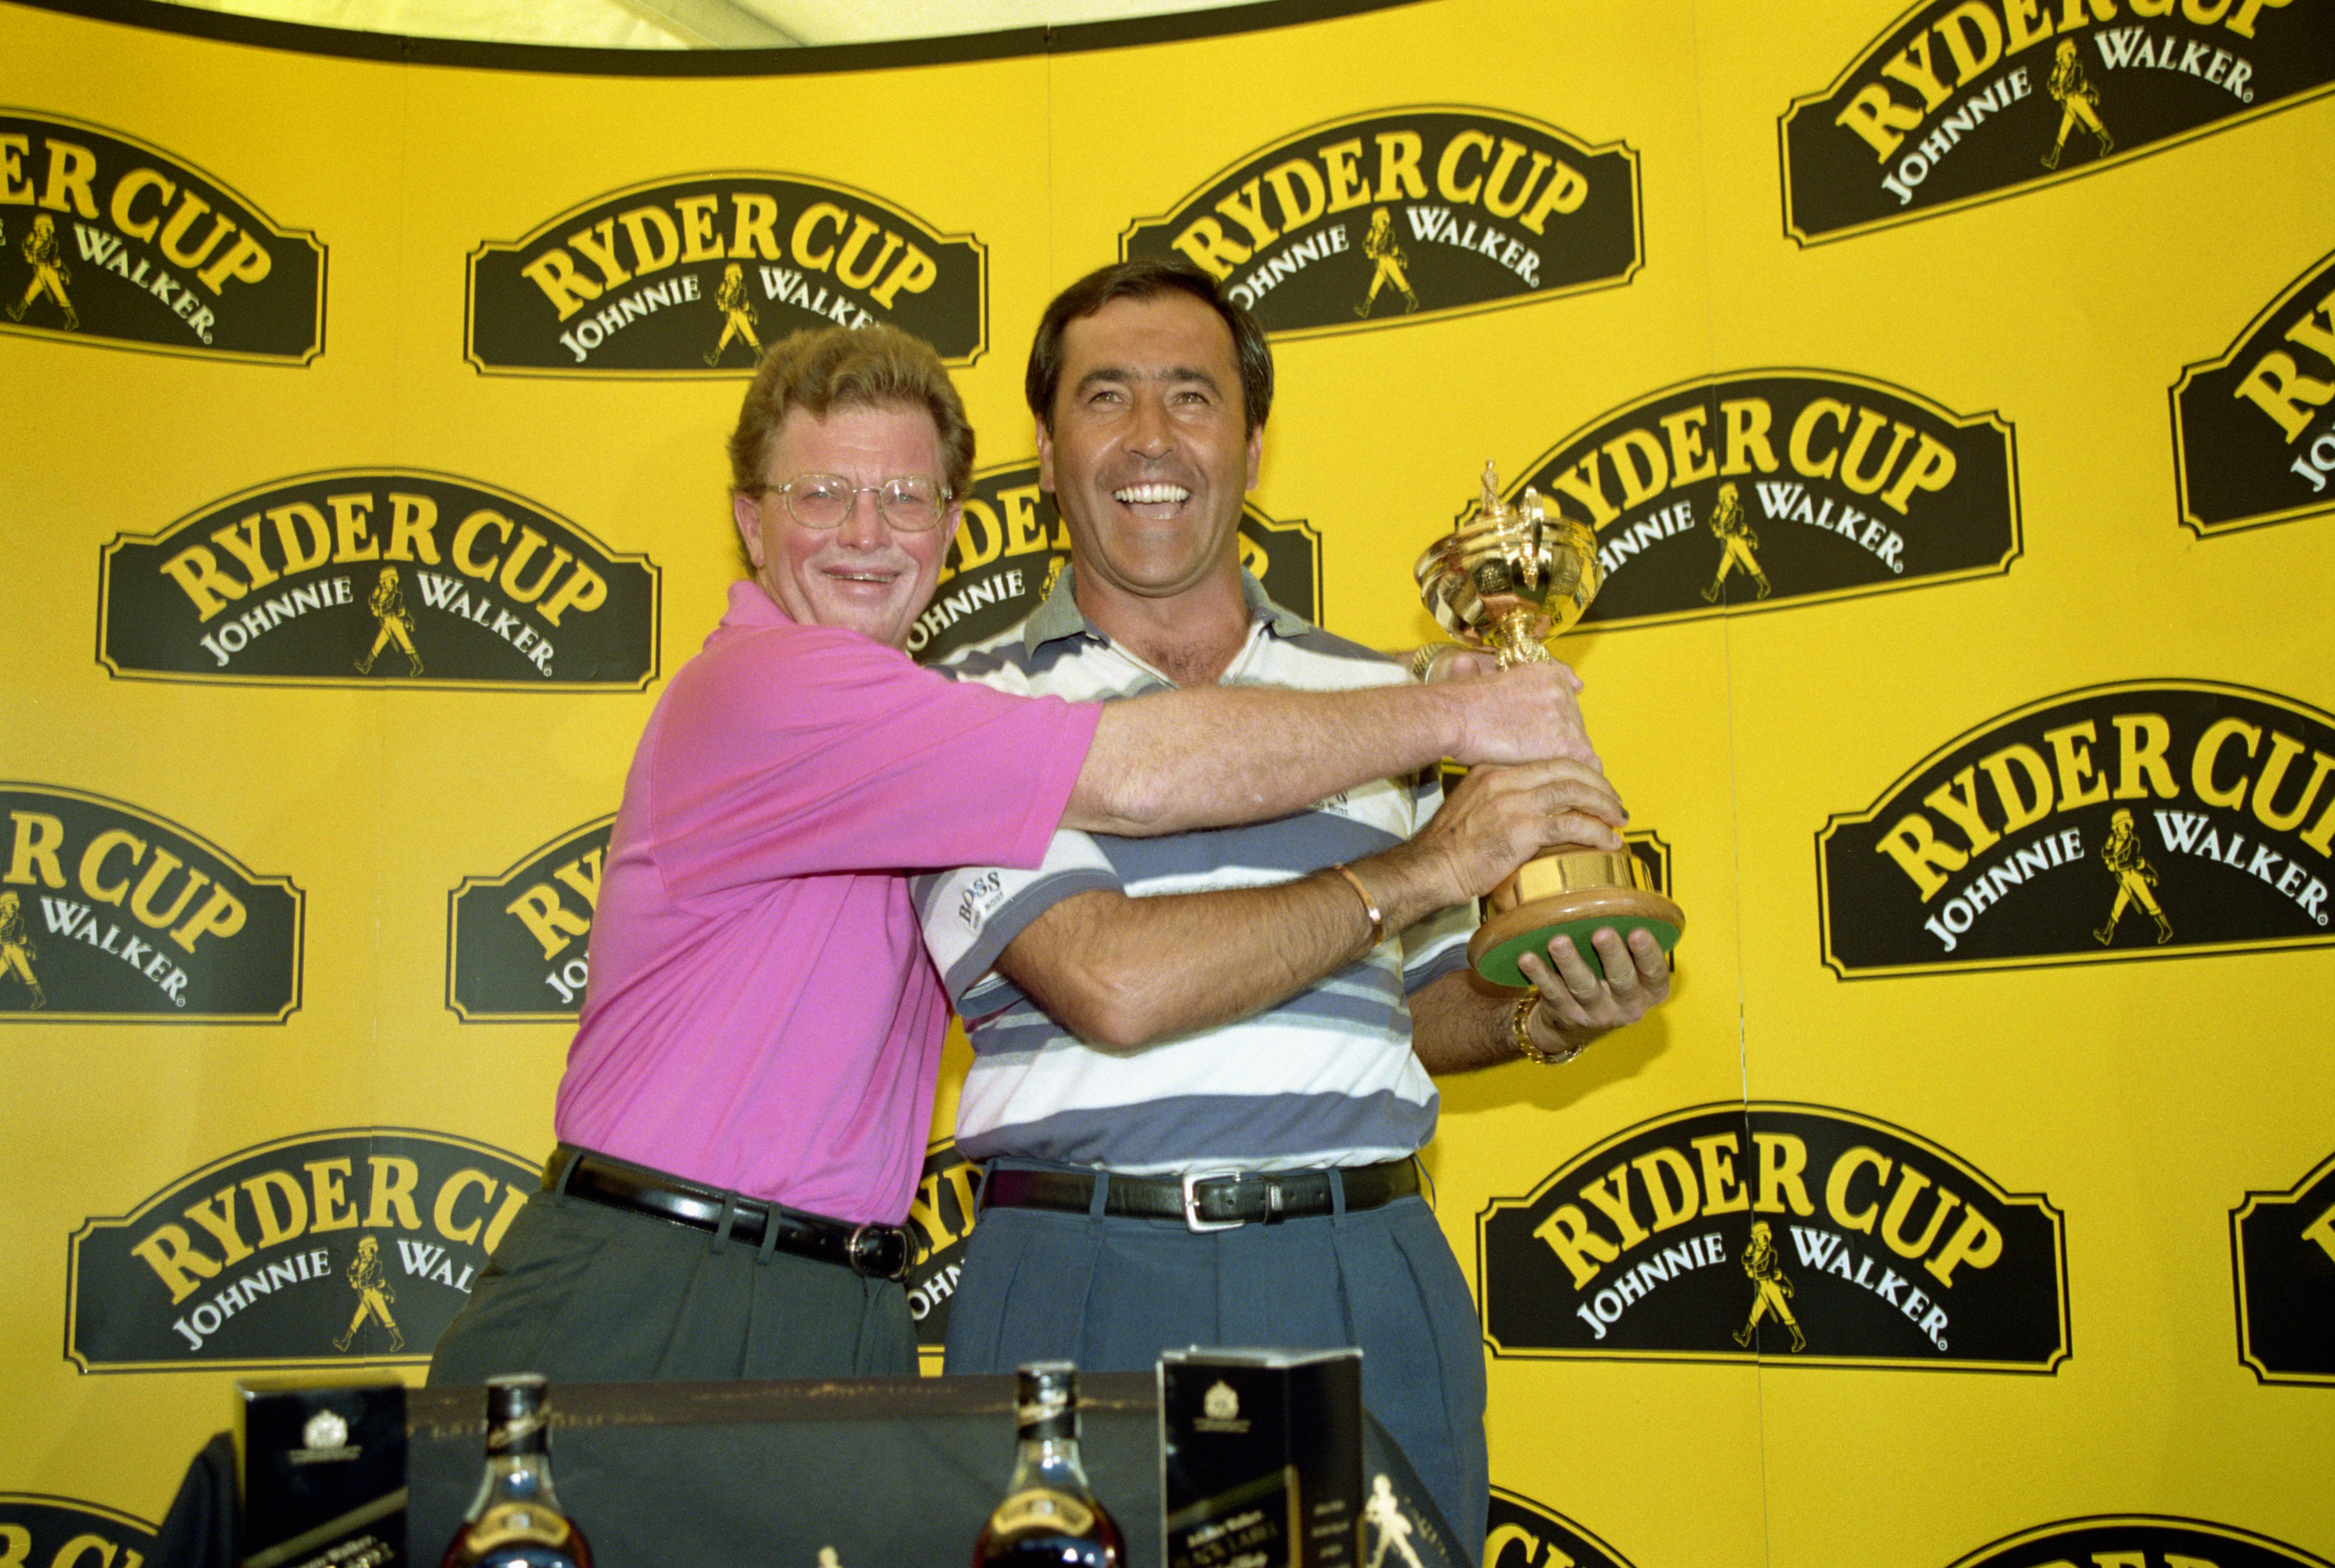 Tom Kite attempts to take the Ryder Cup trophy from Seve Ballesteros (Photo: Getty Images)